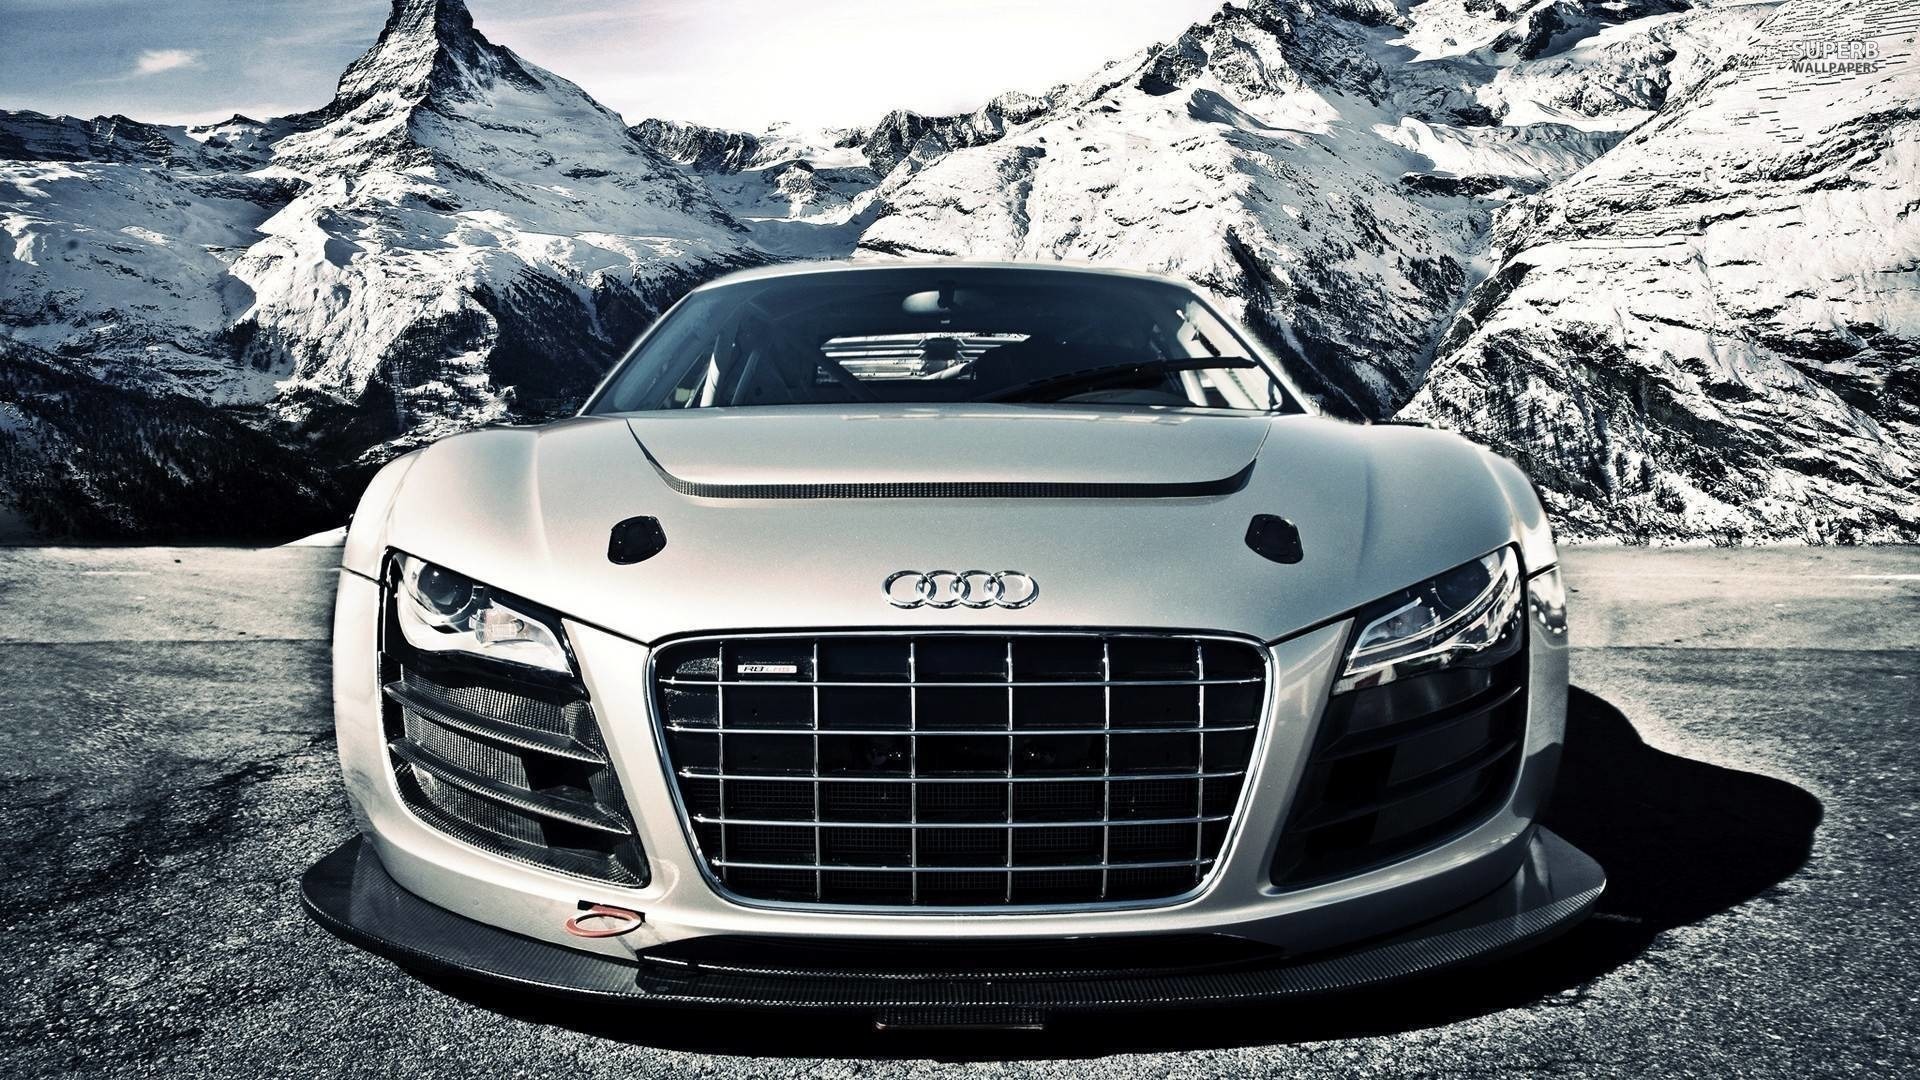 Audi R8 Background 74 Pictures